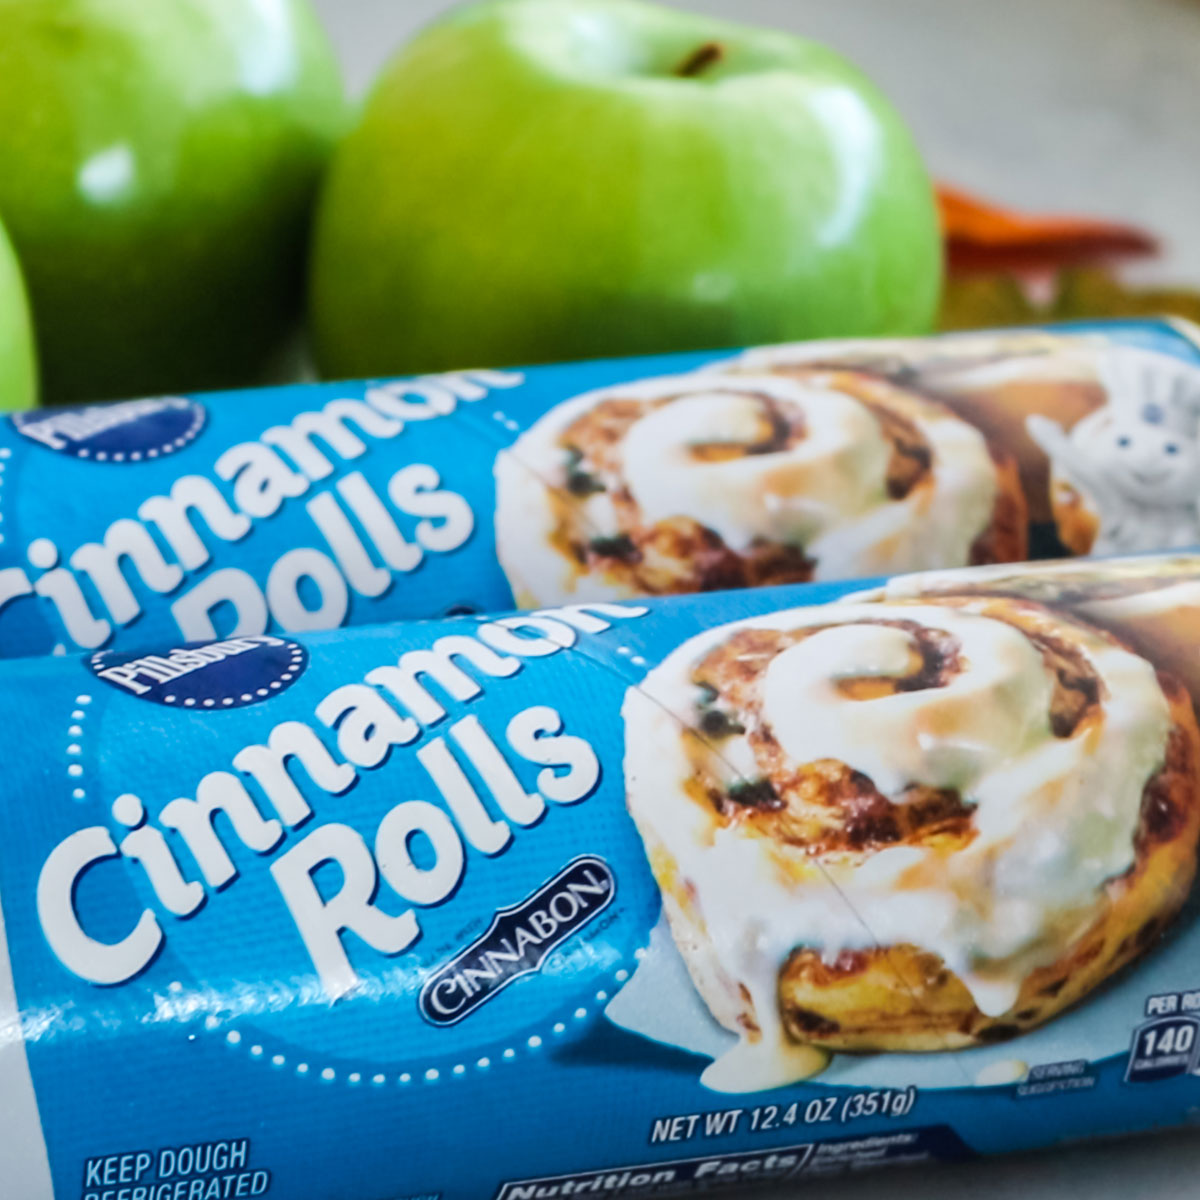 Ingredients you will need to make Apple Cinnamon Rolls including Green Apples and Pillsbury Cinnamon Rolls.